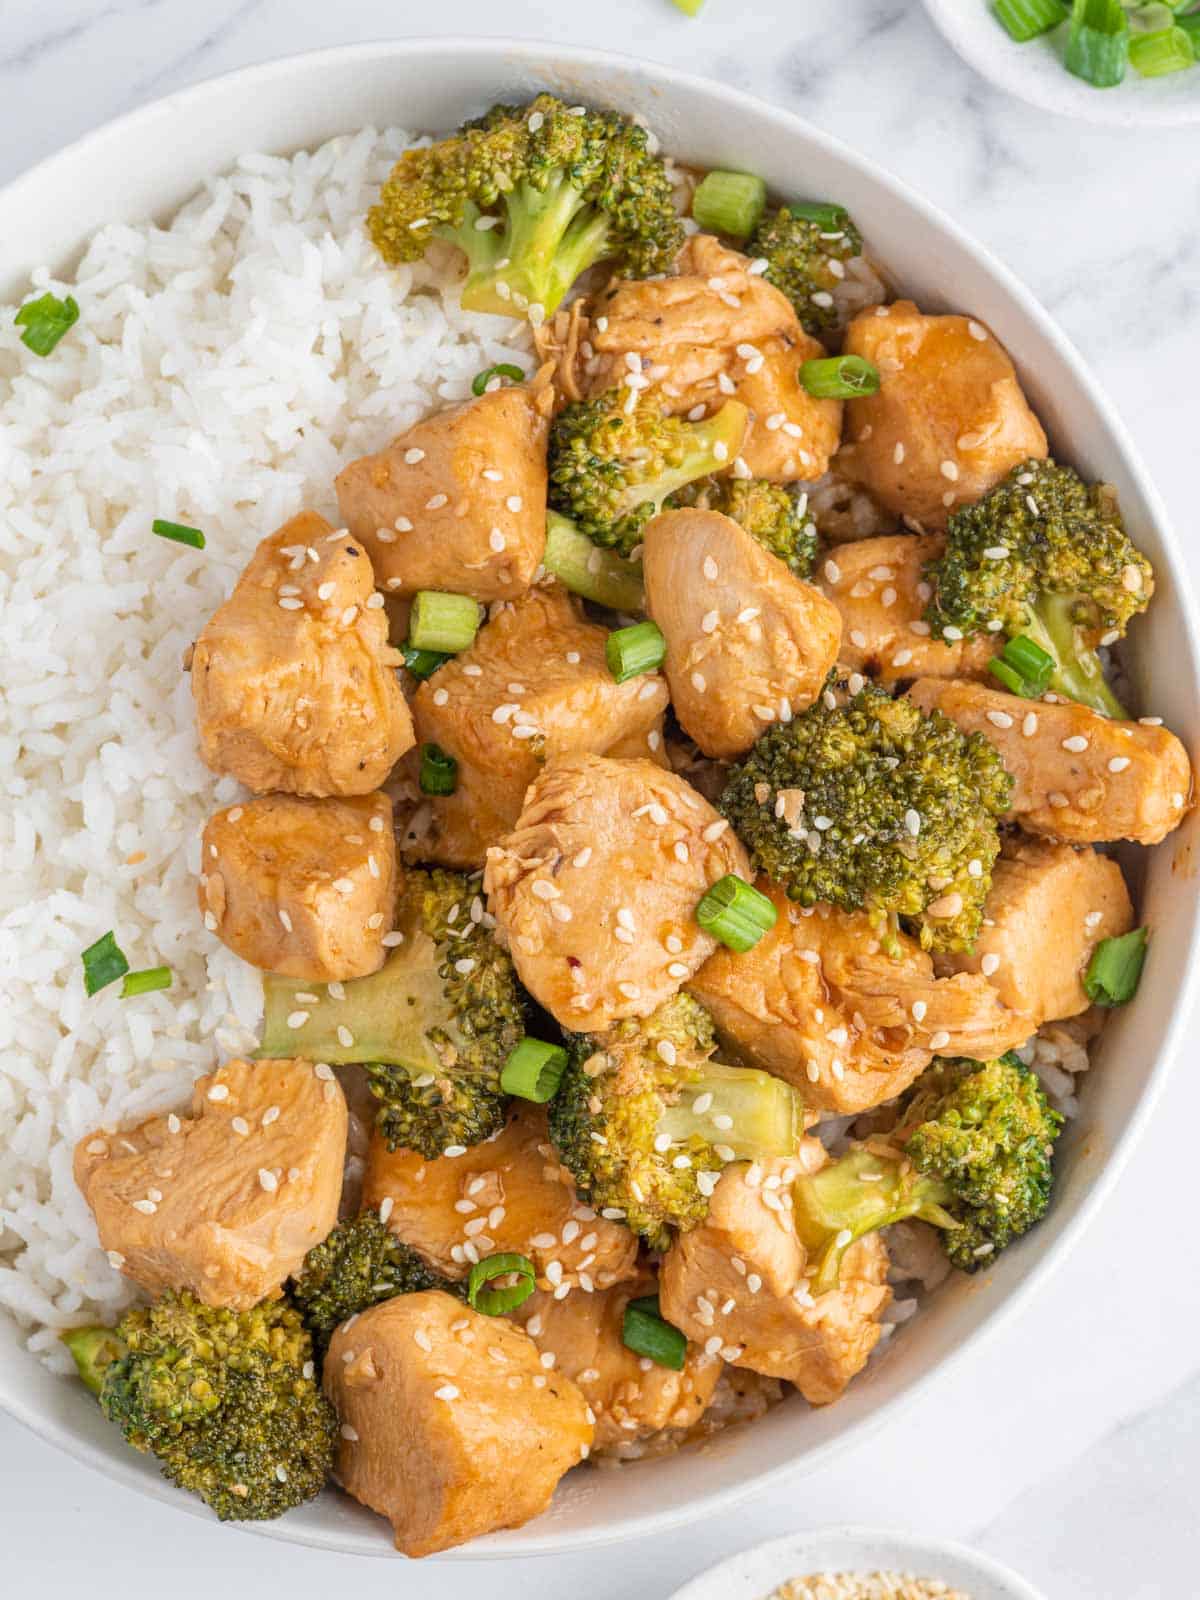 Chicken and broccoli instant pot stir fry on a plate with rice.